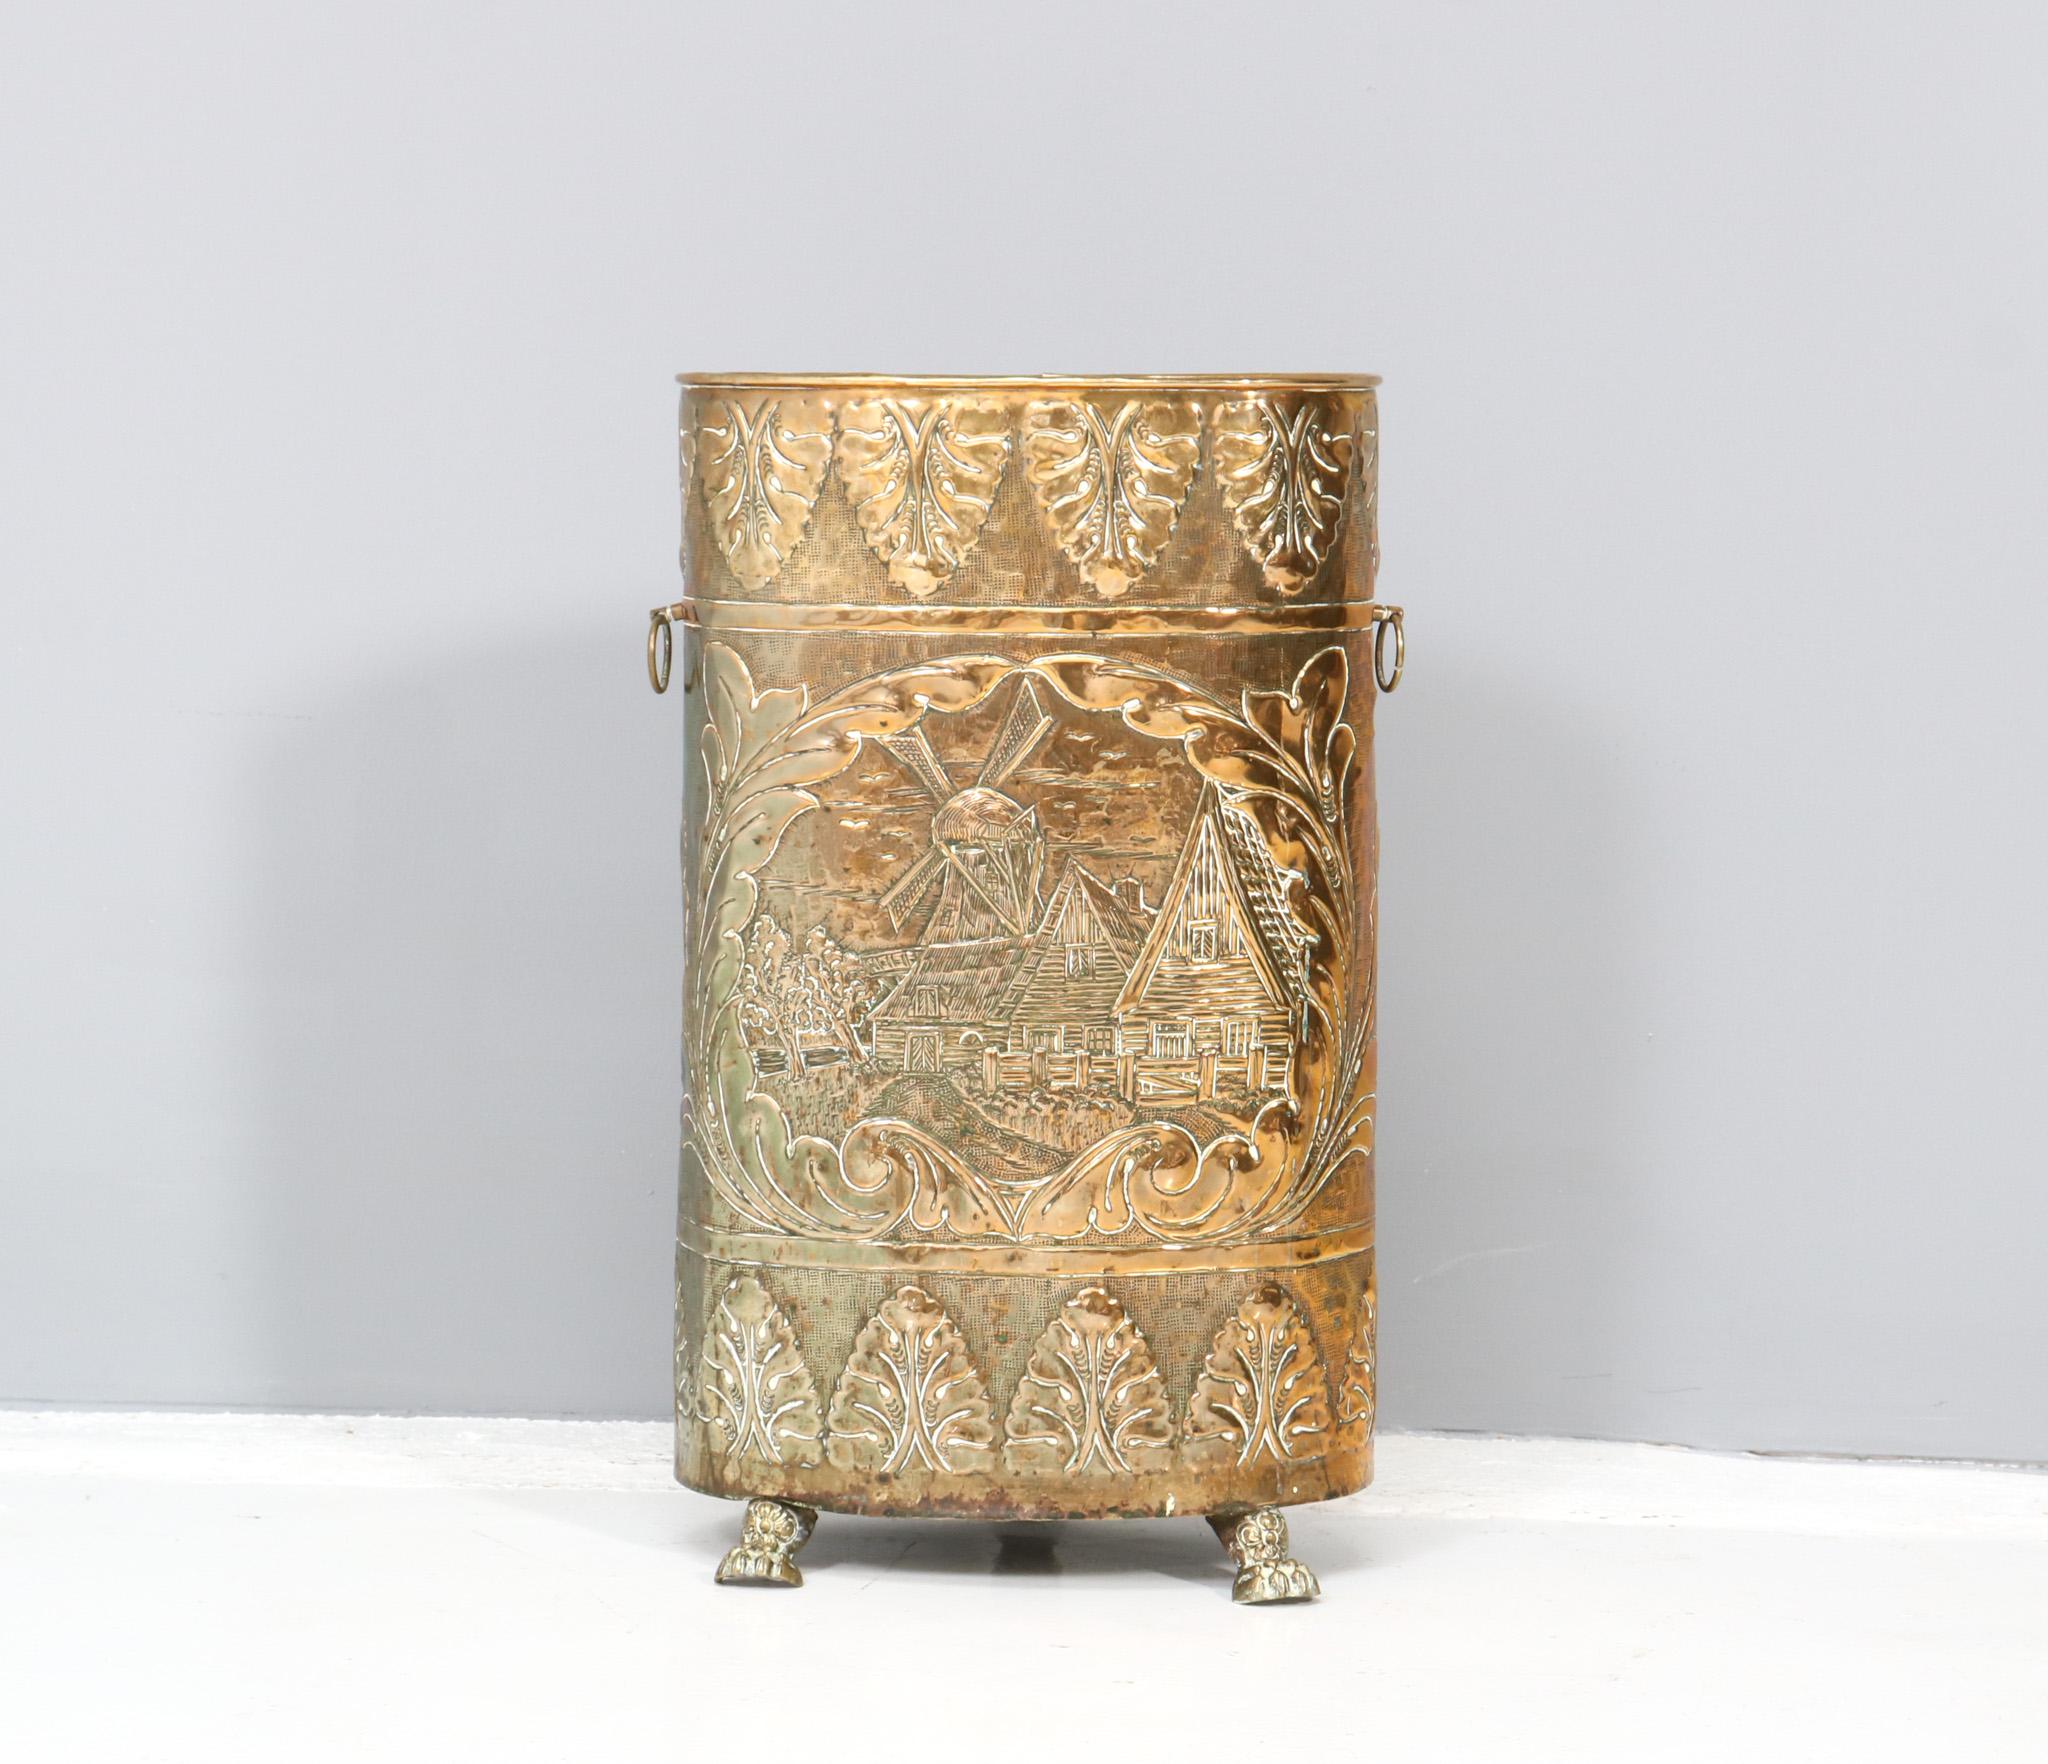 Stunning and decorative Dutch umbrella stand.
Striking Dutch design from the 1900s.
Original patinated brass frame with decorative elements such as a wind mill etc.
The frame rests on original claw feet.
This wonderful patinated brass Dutch umbrella